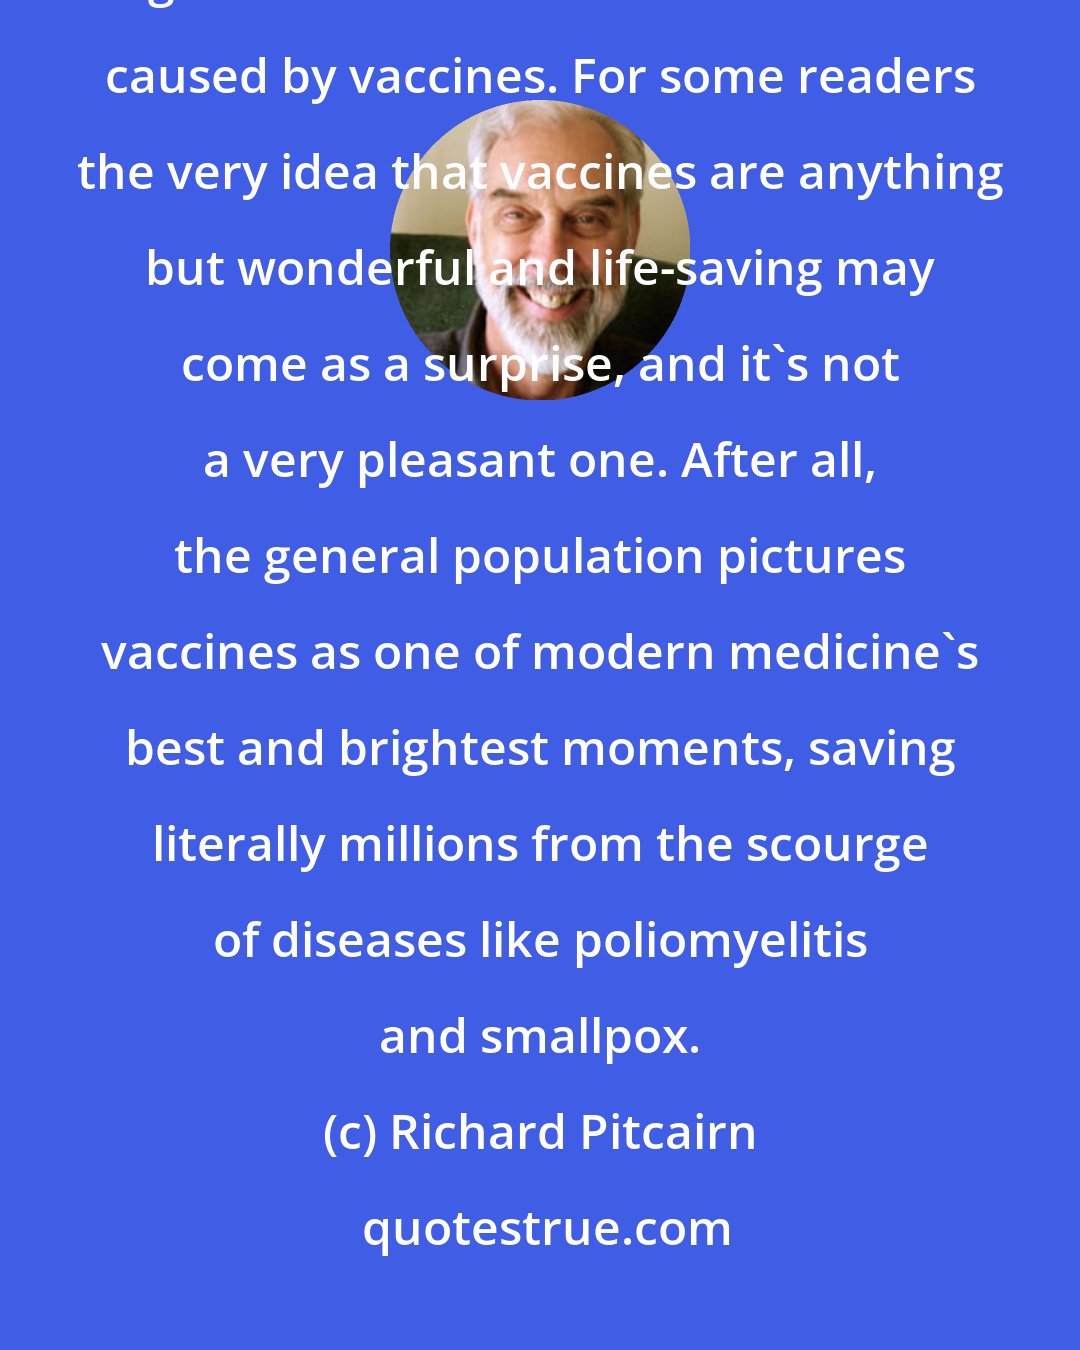 Richard Pitcairn: In this article we begin to address the subject of vaccinosis, the general name for chronic dis-ease caused by vaccines. For some readers the very idea that vaccines are anything but wonderful and life-saving may come as a surprise, and it's not a very pleasant one. After all, the general population pictures vaccines as one of modern medicine's best and brightest moments, saving literally millions from the scourge of diseases like poliomyelitis and smallpox.